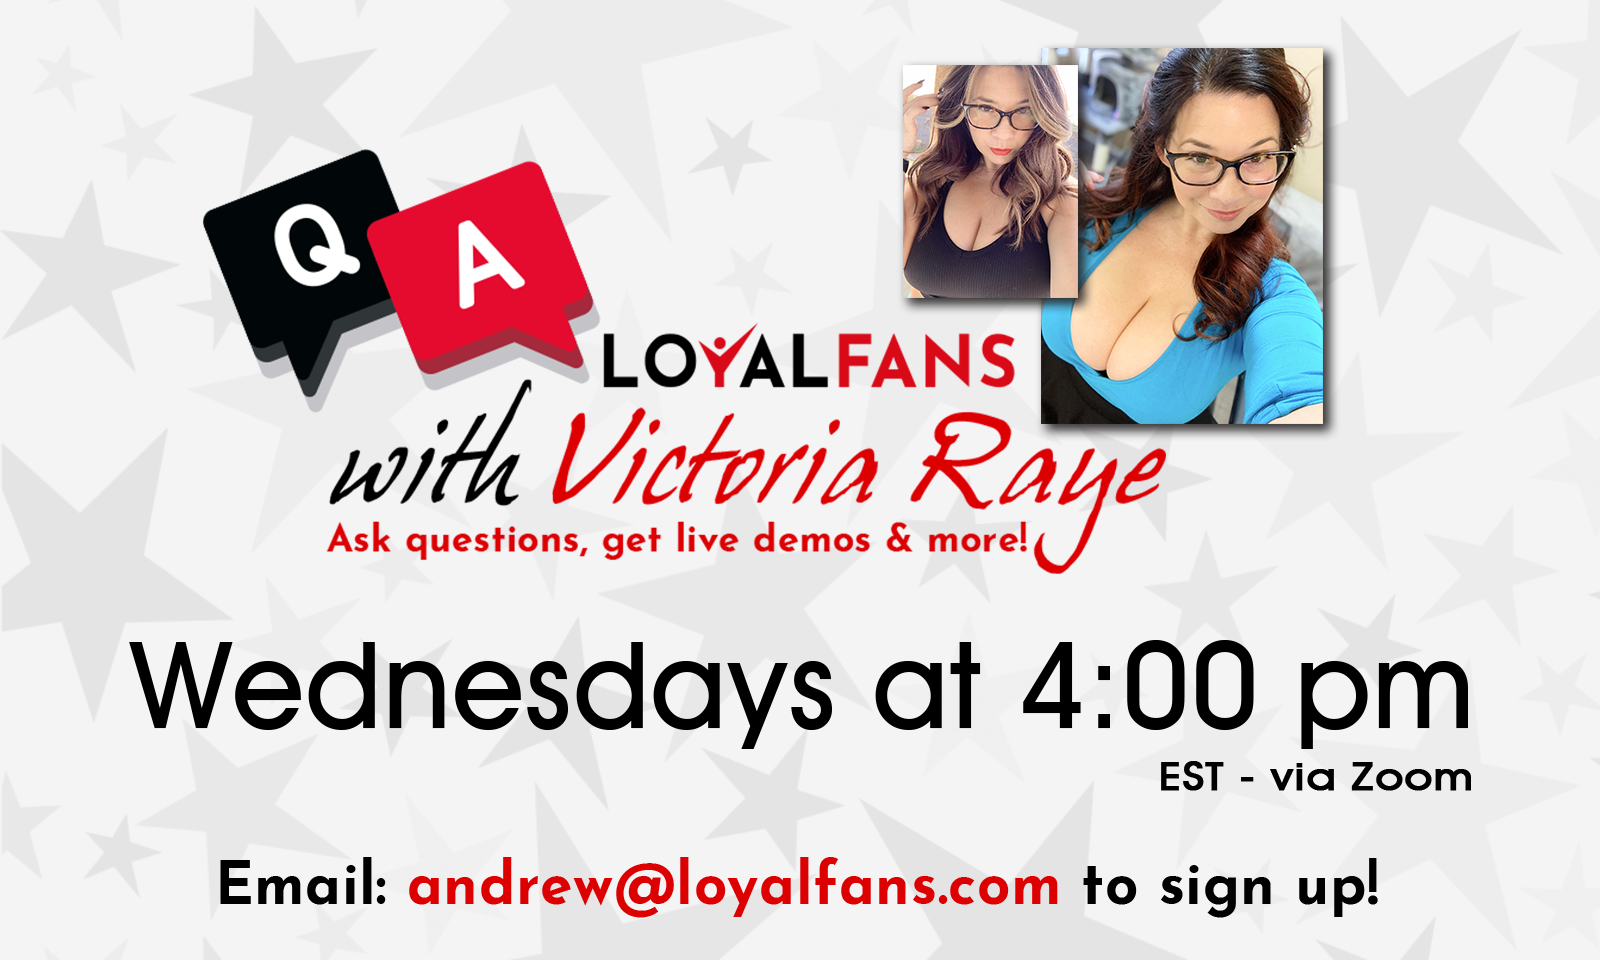 Loyalfans.com is pleased to announce the launch of weekly “Q&A with...